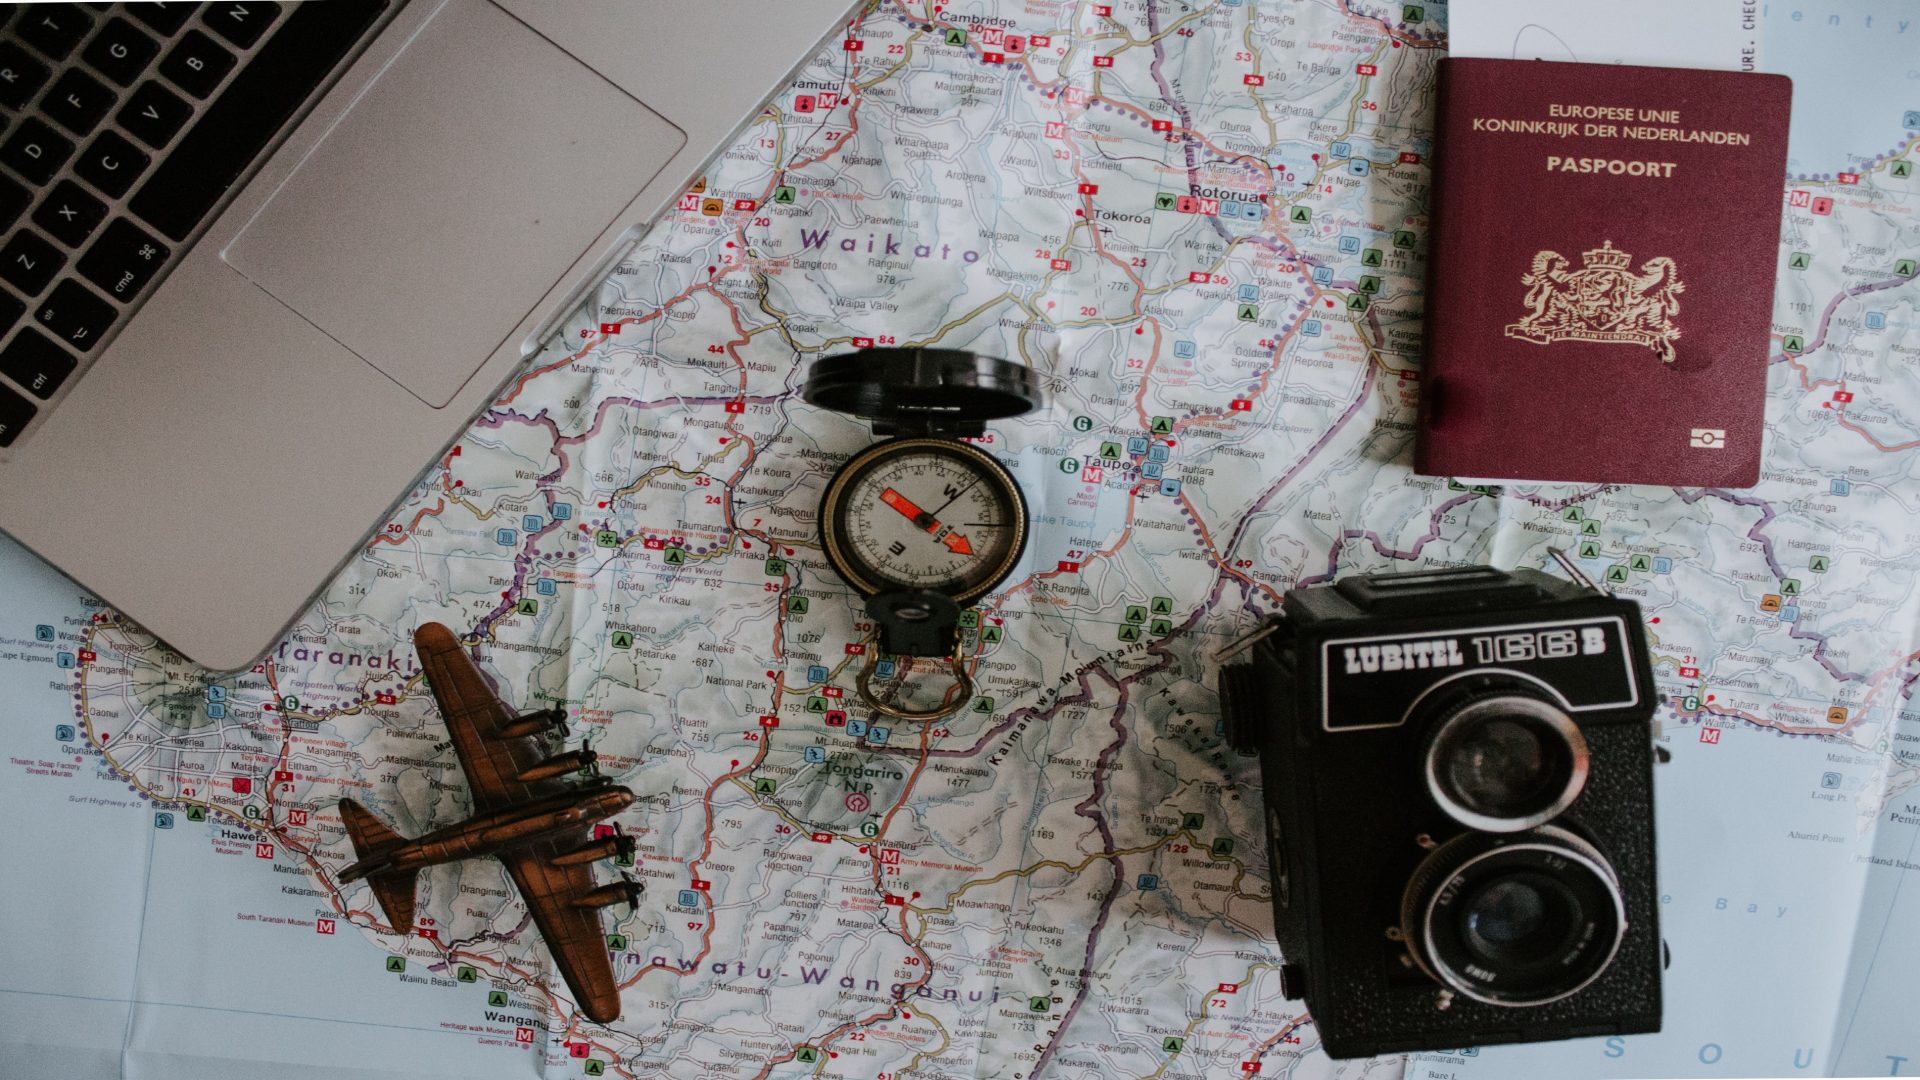 A camera, passport and compass on a map.